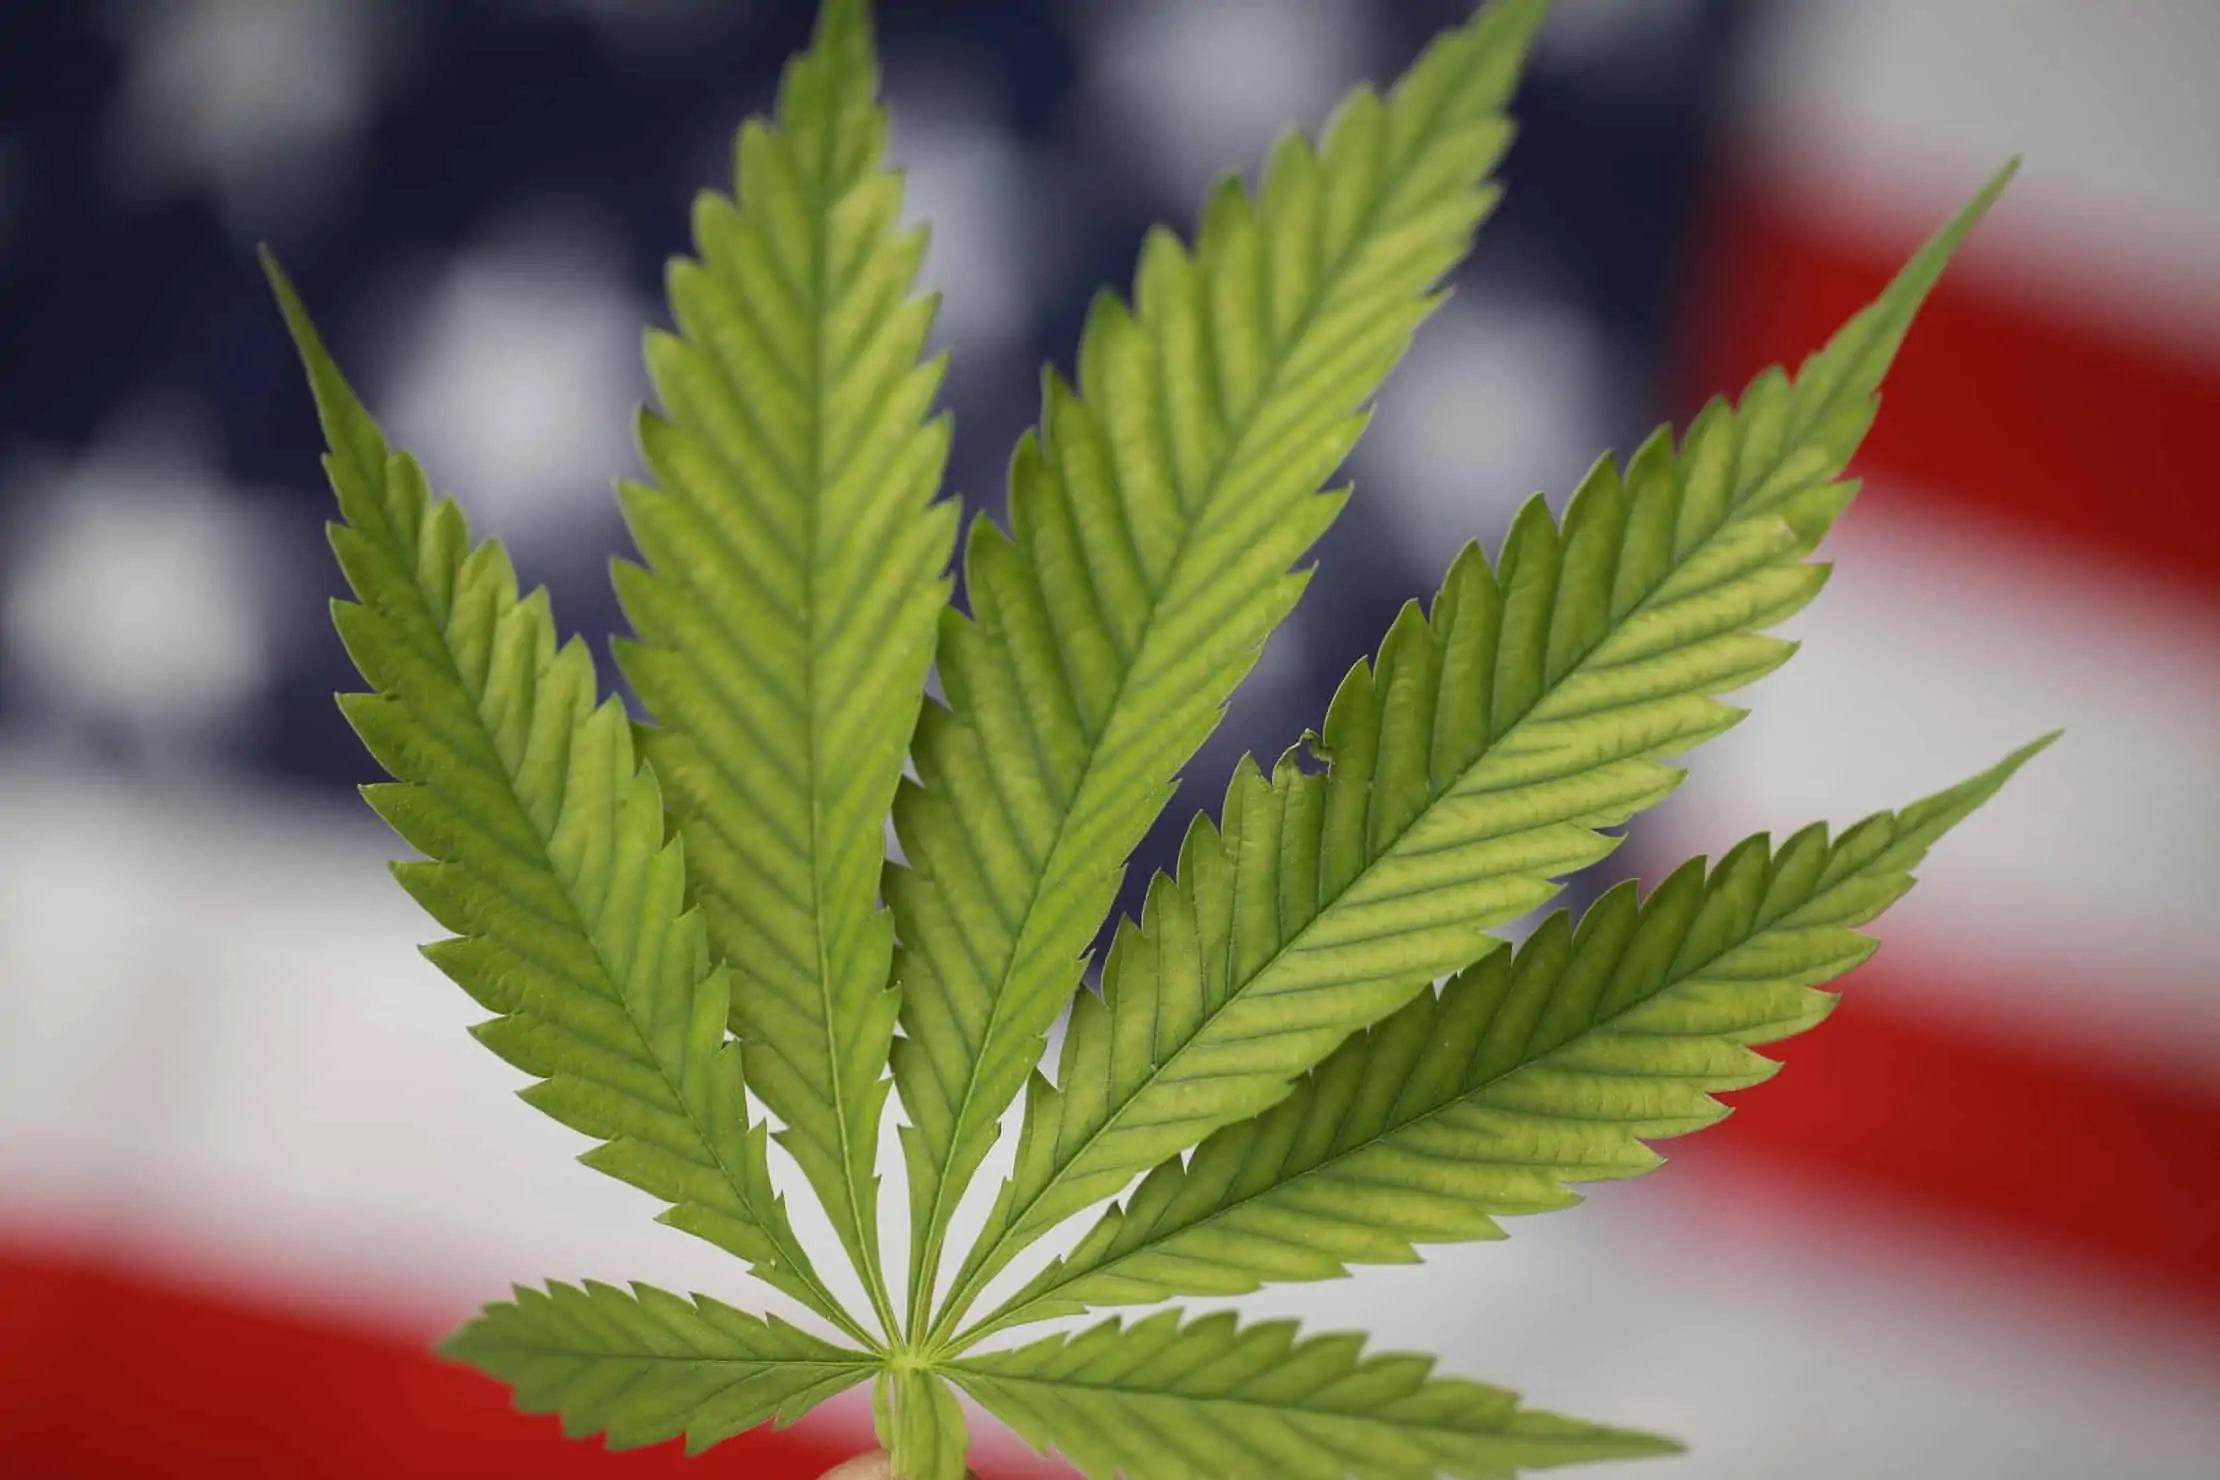 How the 2018 Midterm Election Made It Easier to Access Marijuana. Cannabis leave with US flag in background.